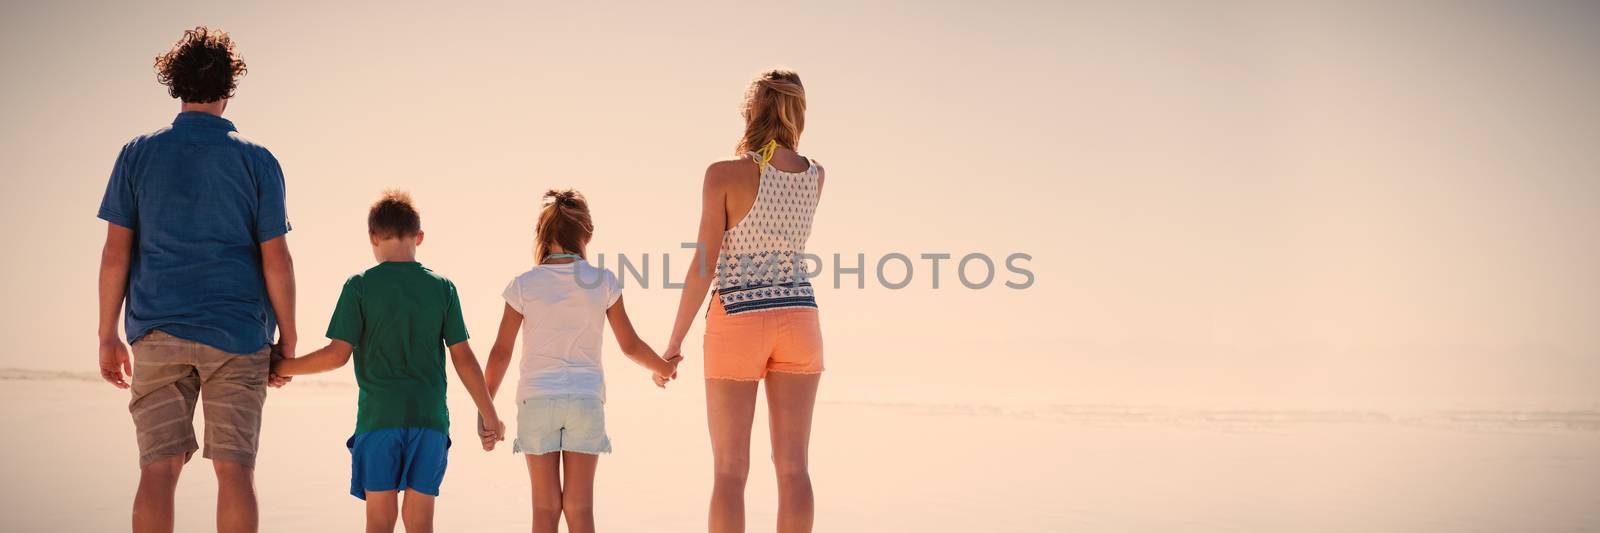 Rear view of family holding hands while standing together on shore at beach during sunny day